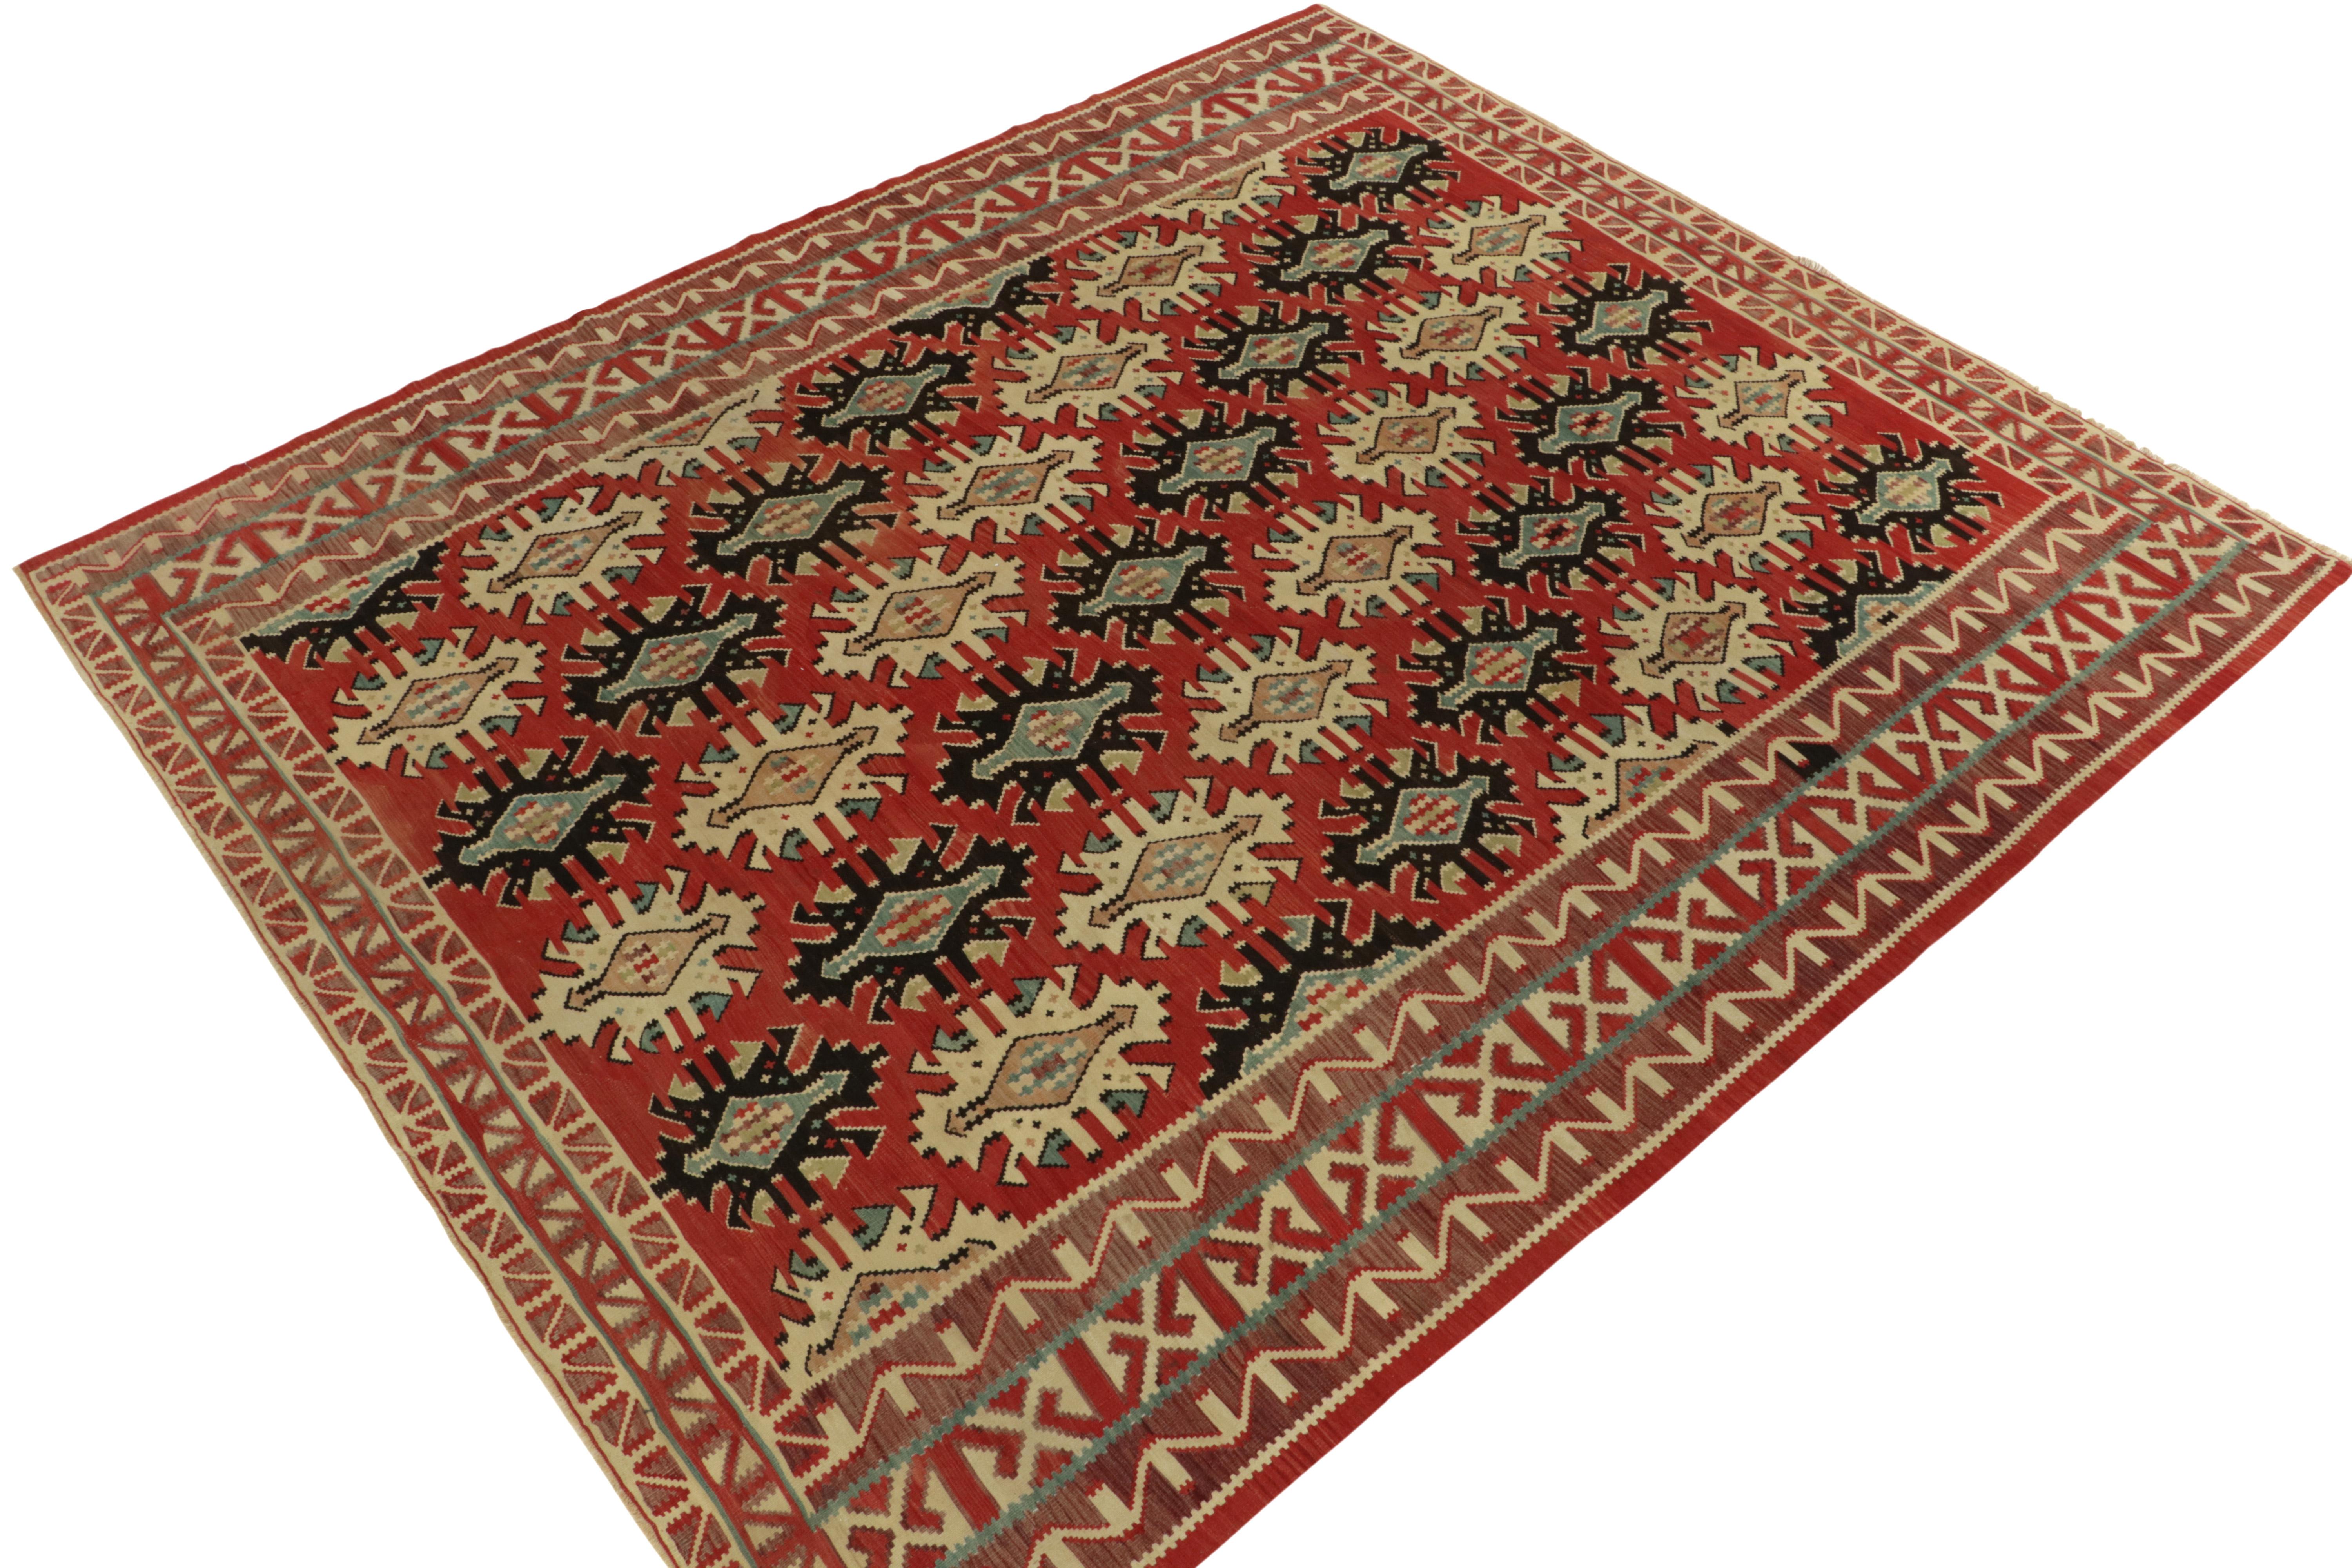 Handwoven in fine wool, a 10x12 vintage kilim rug from Turkey, now joining our Kilim & Flatweave collection. 

Carrying a folk art appeal, the 1950s piece reflects a marriage of Macedonian and Caucasian sensibility in design with traditional